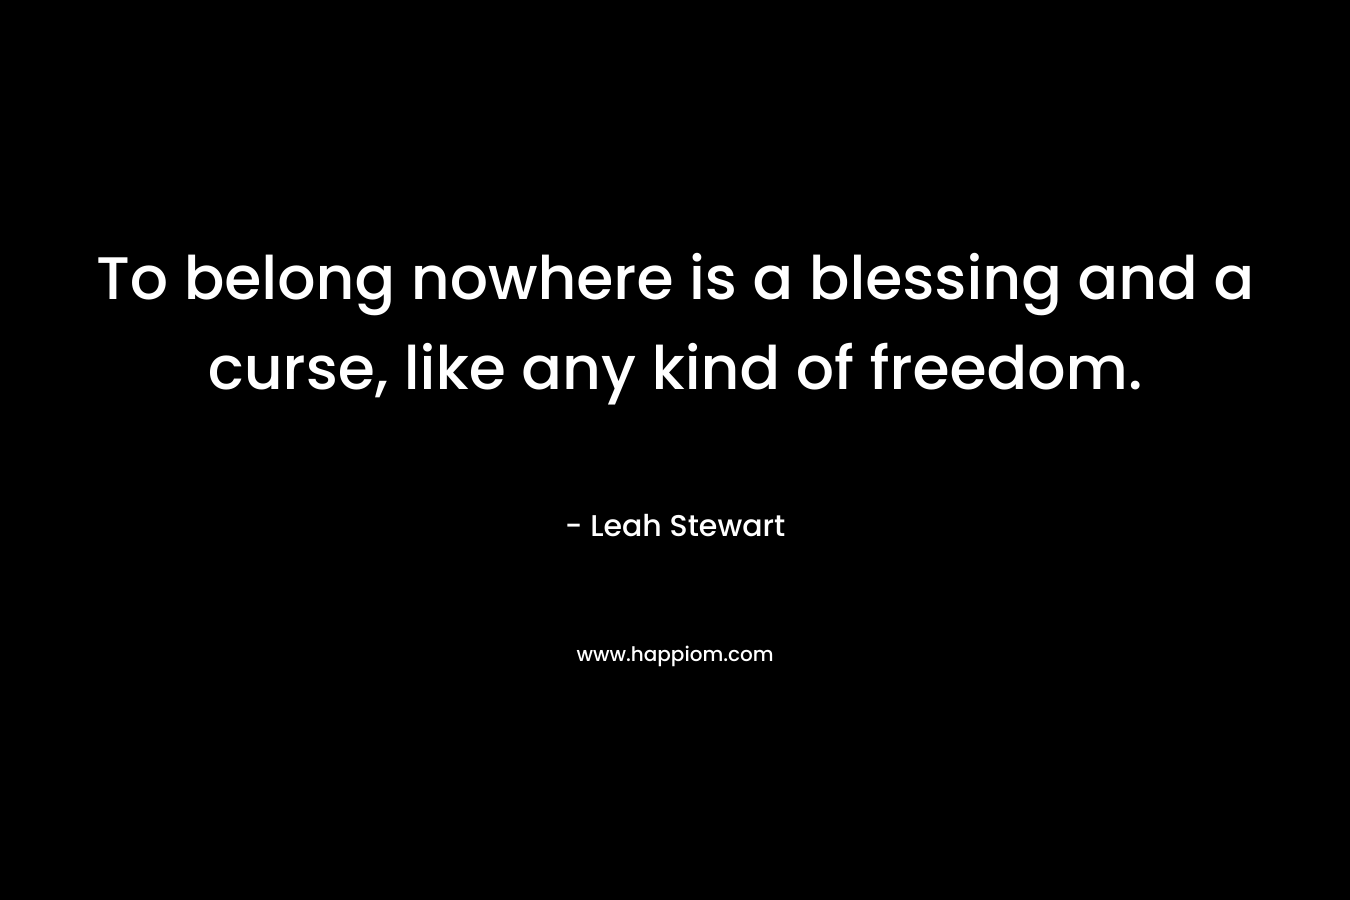 To belong nowhere is a blessing and a curse, like any kind of freedom.